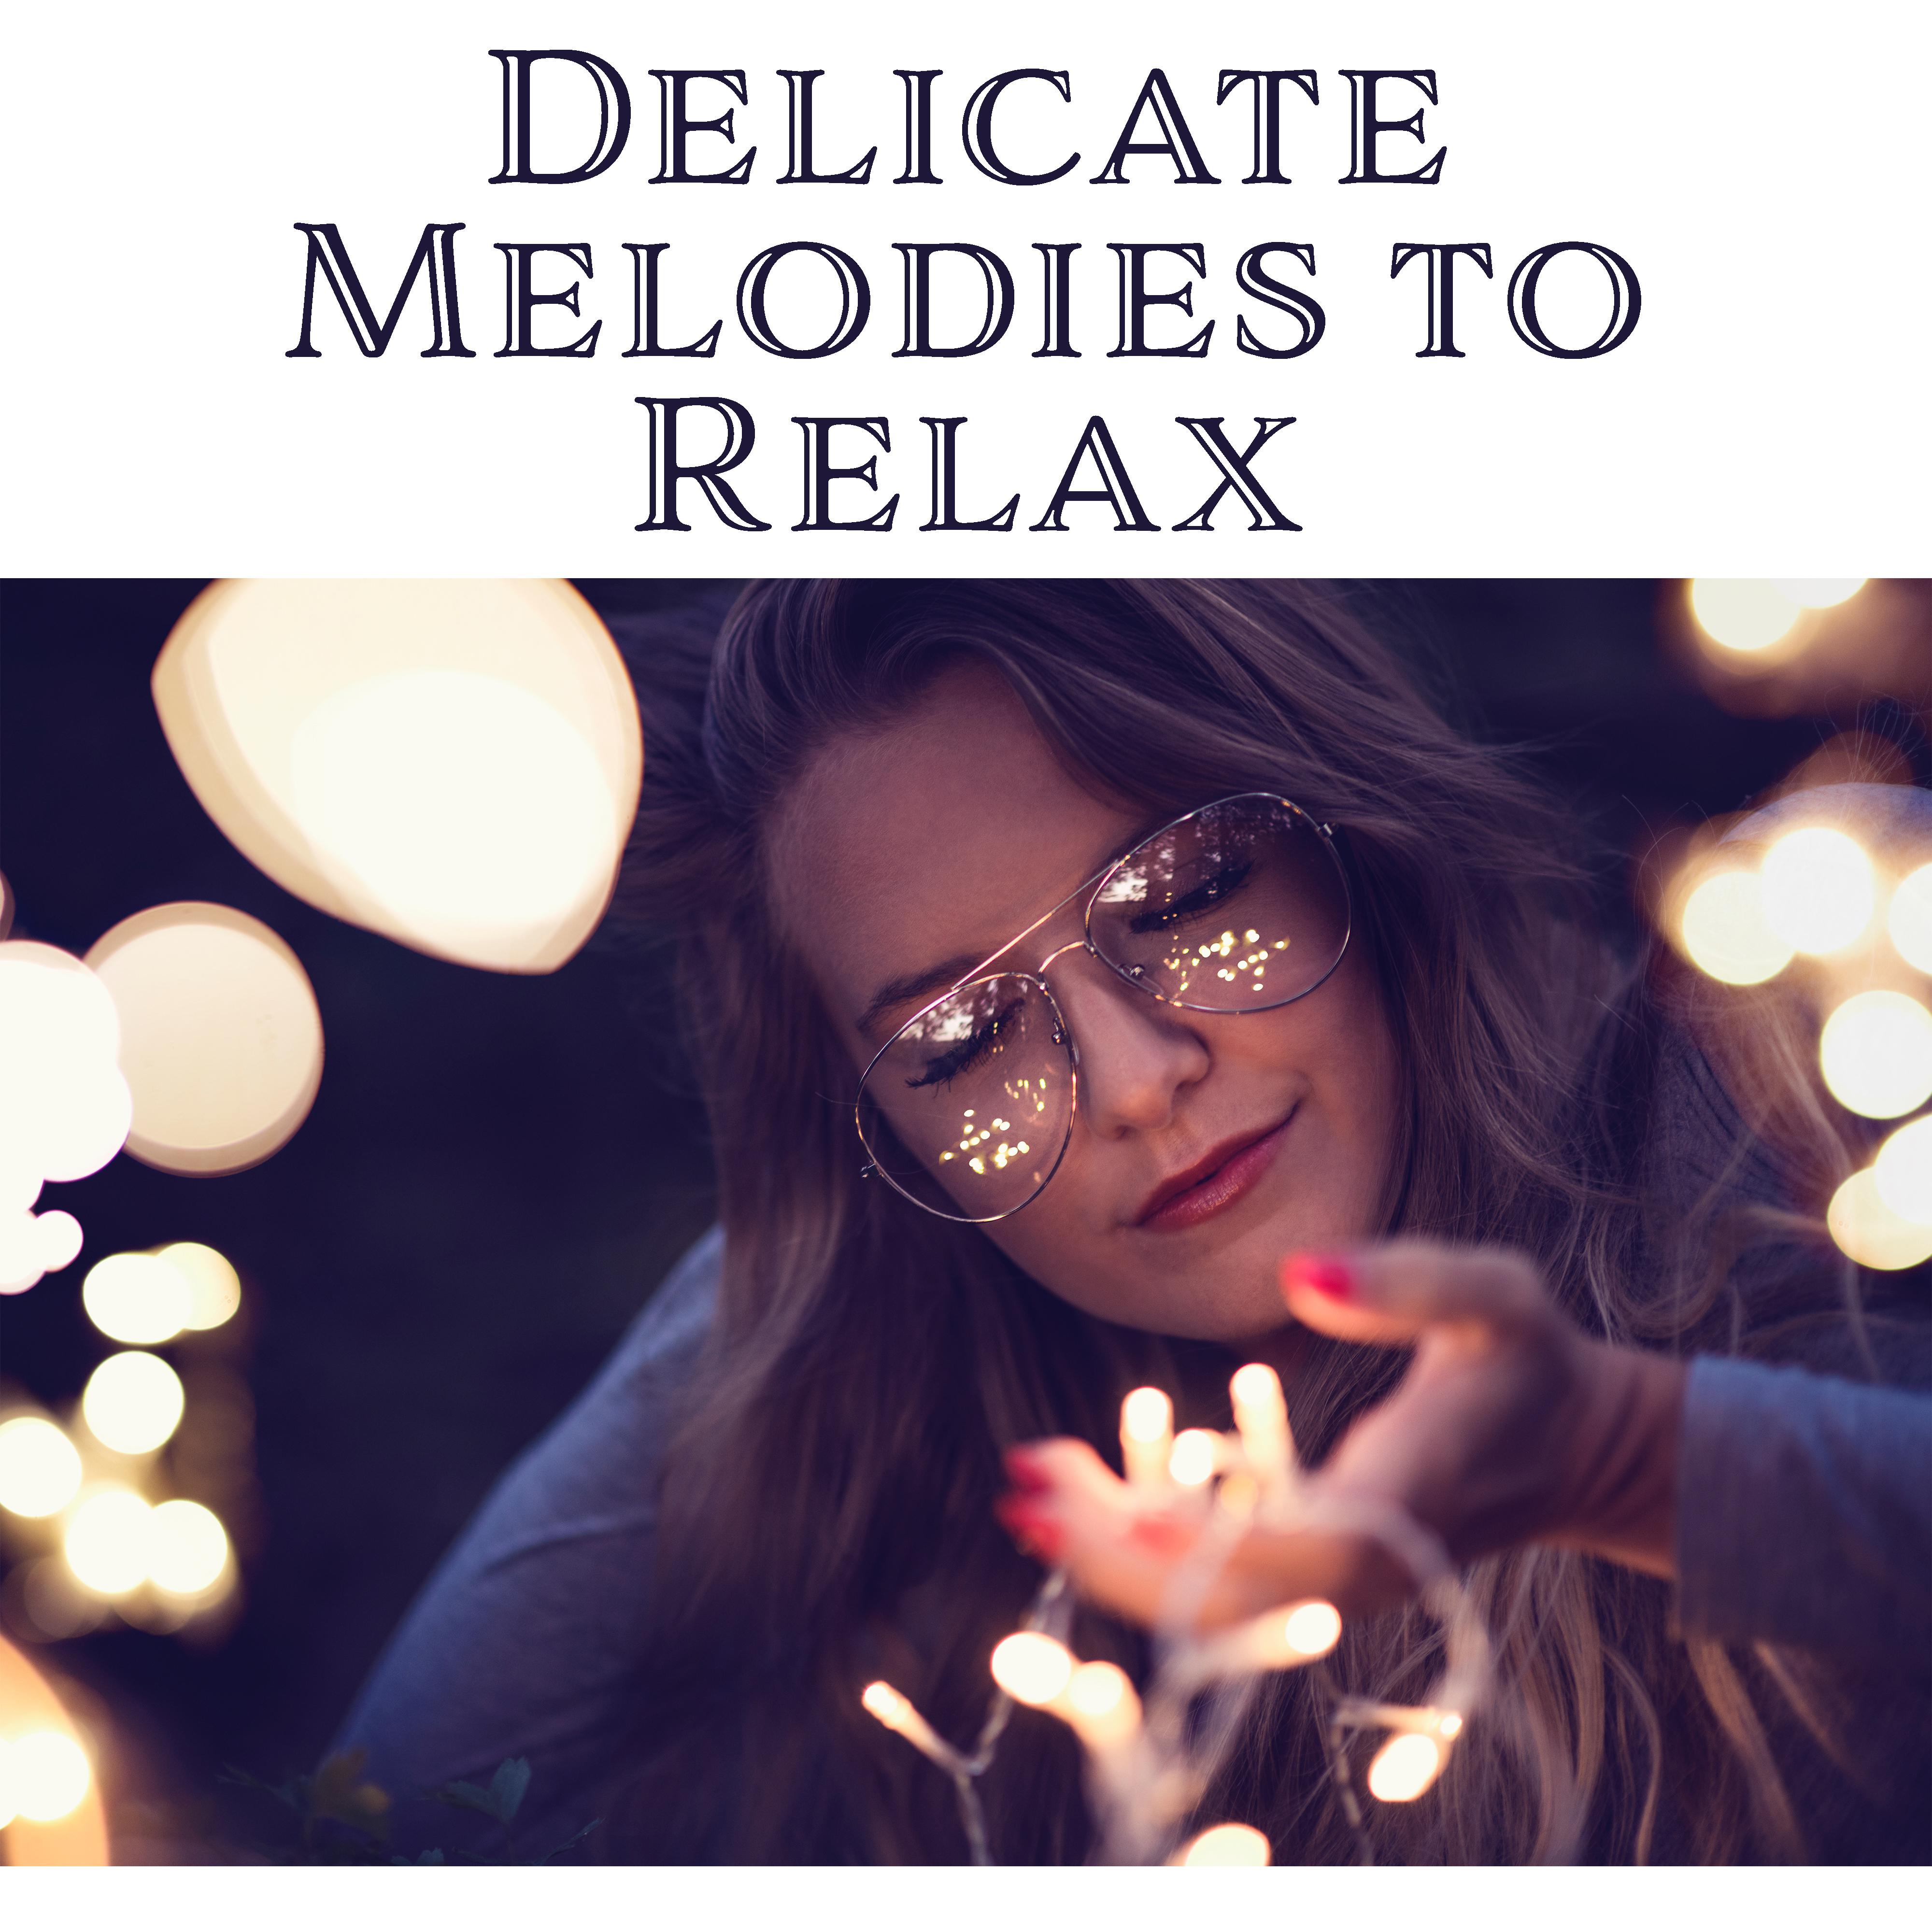 Delicate Melodies to Relax